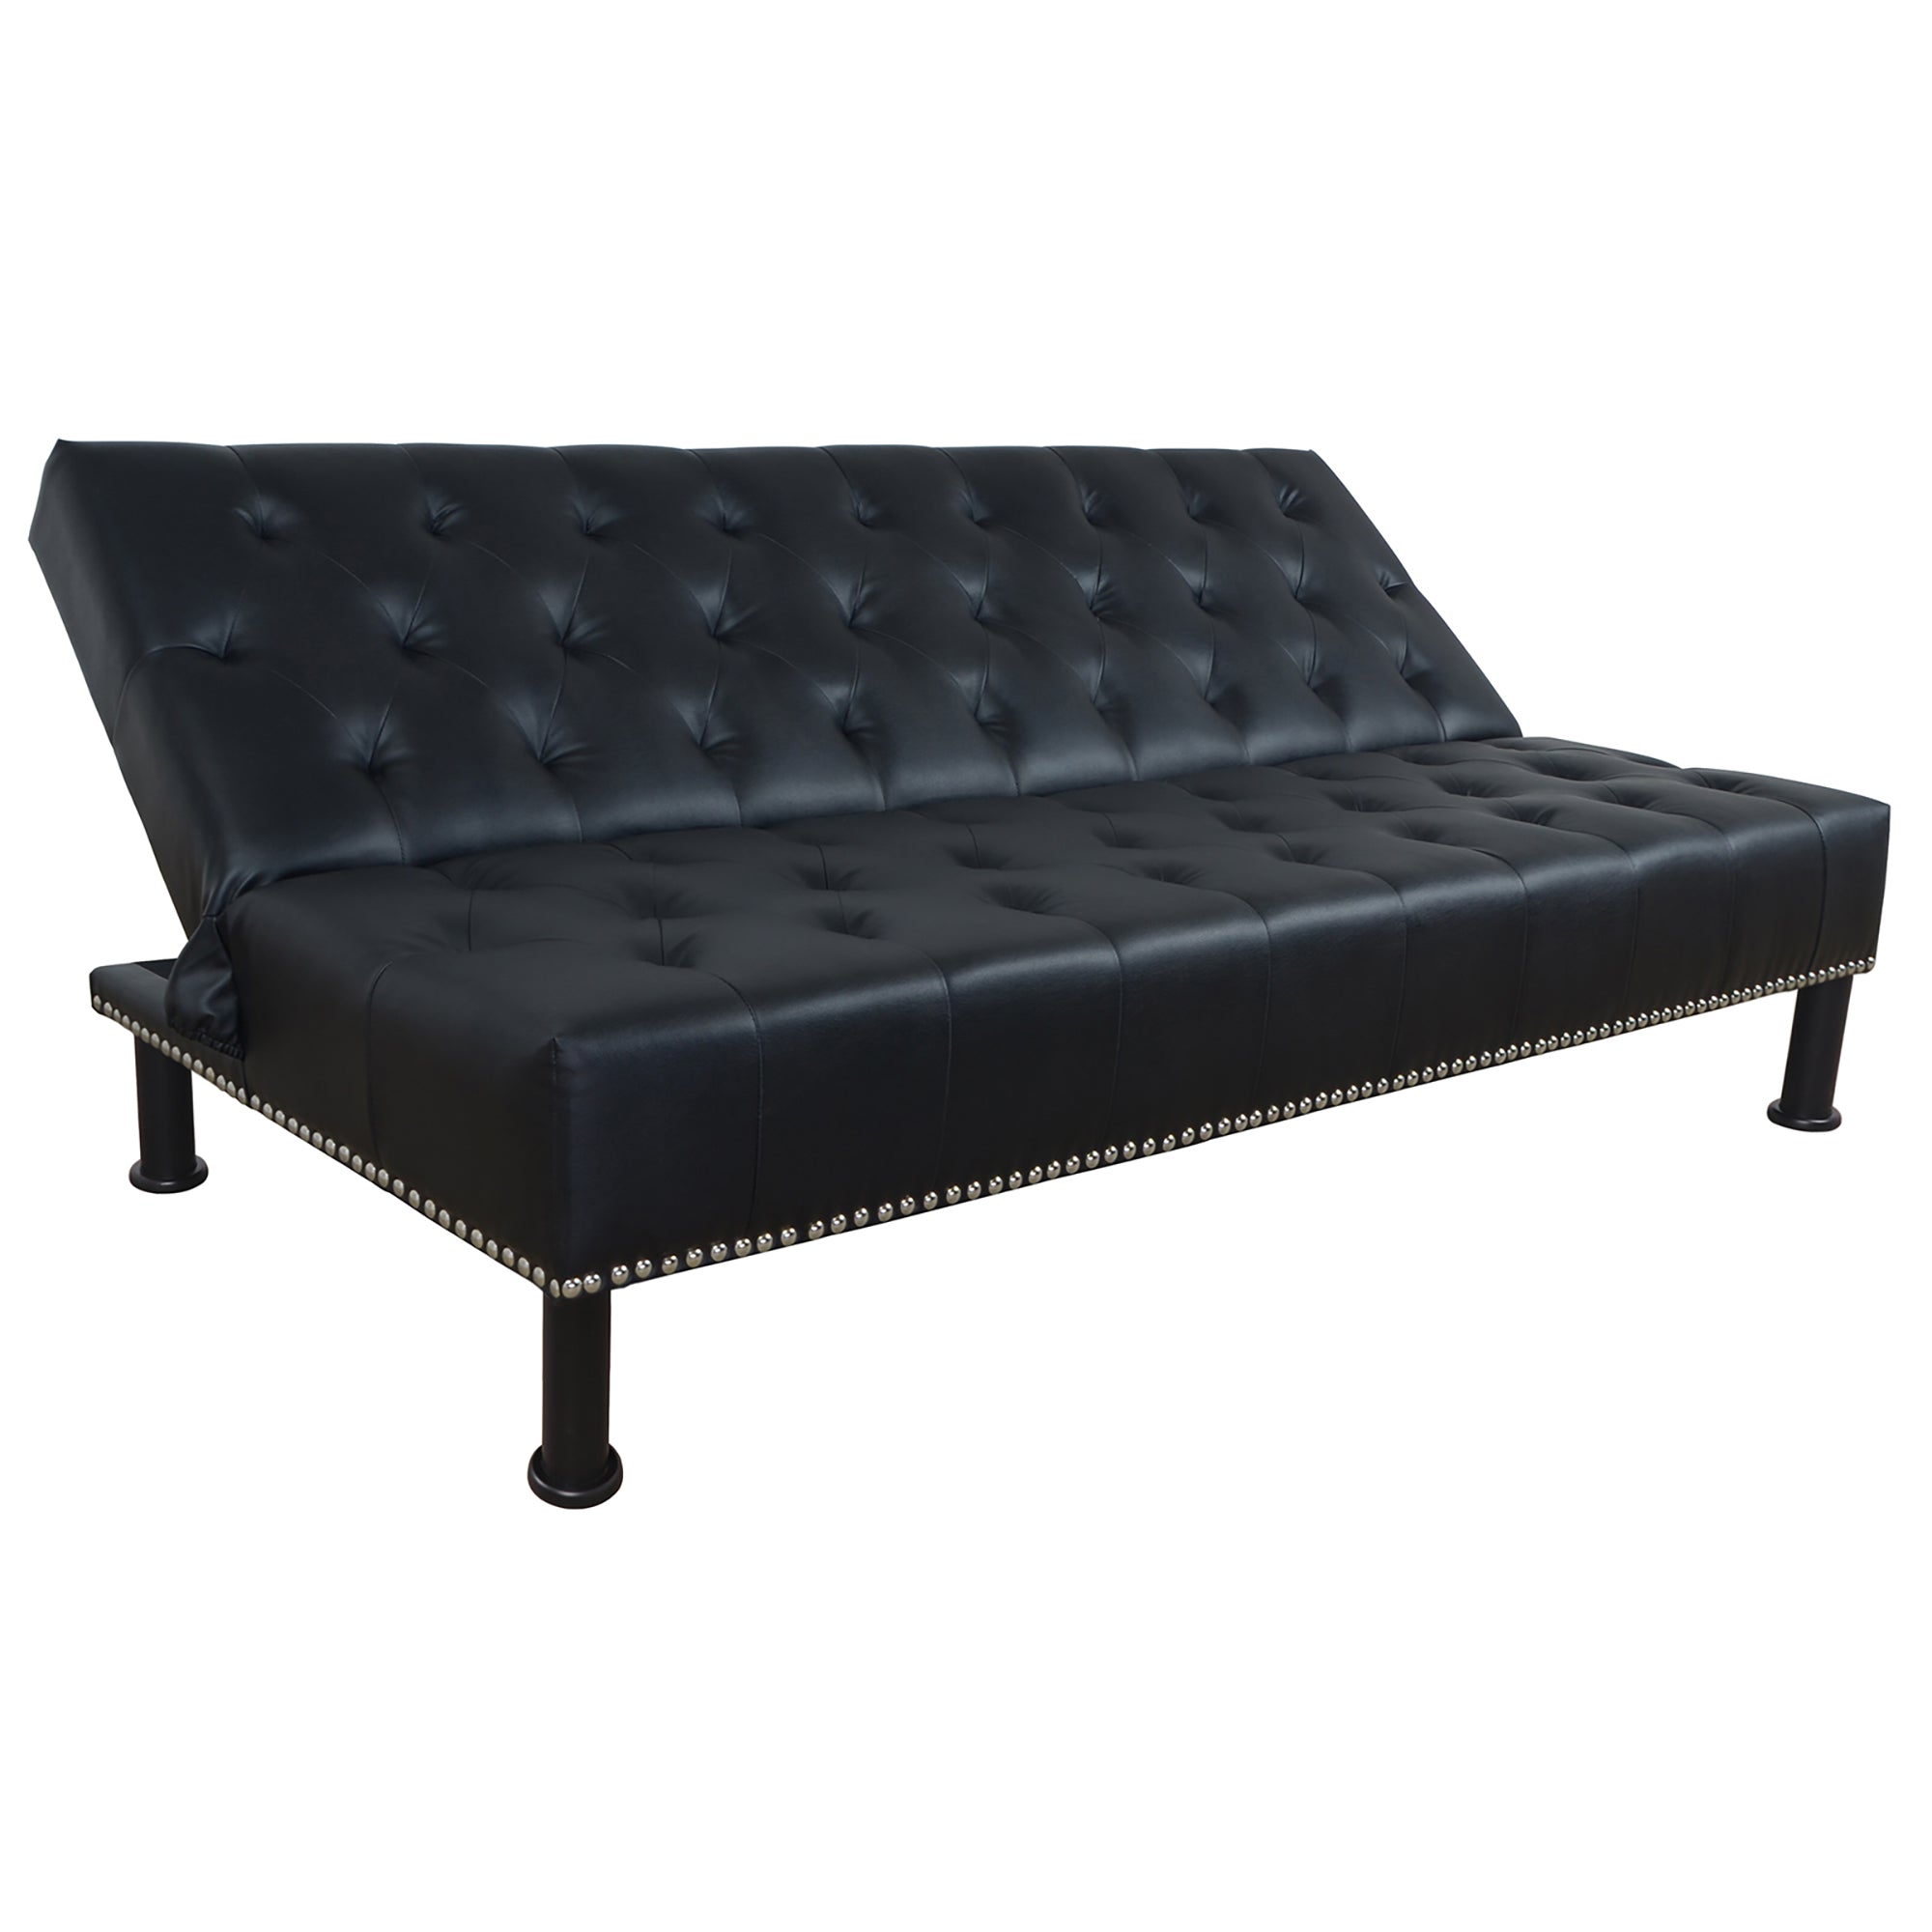 Ainehome Black Faux Leather Sofa bed